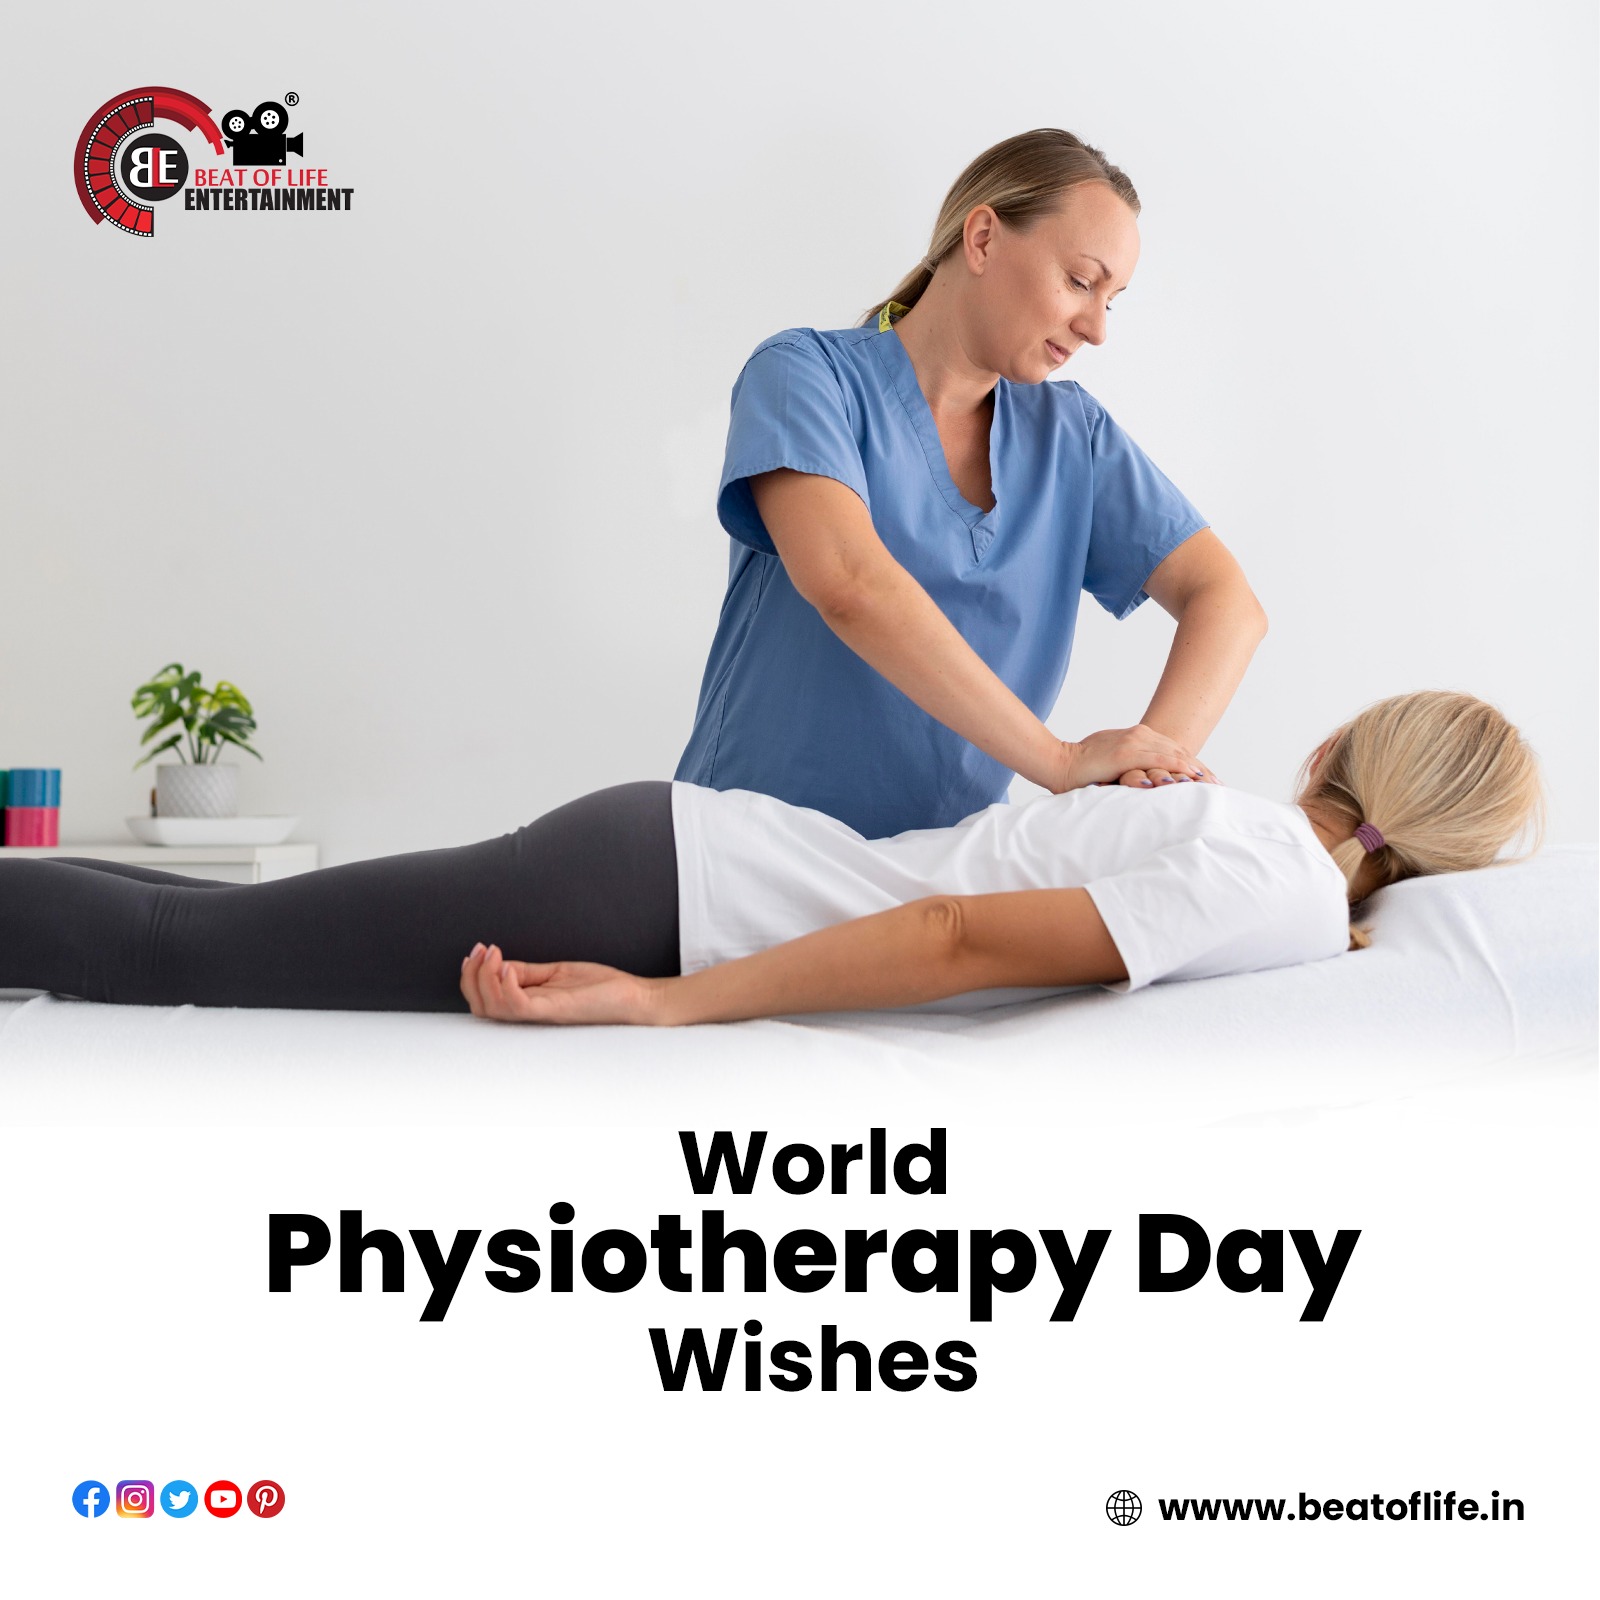 World Physiotherapy Day Wishes